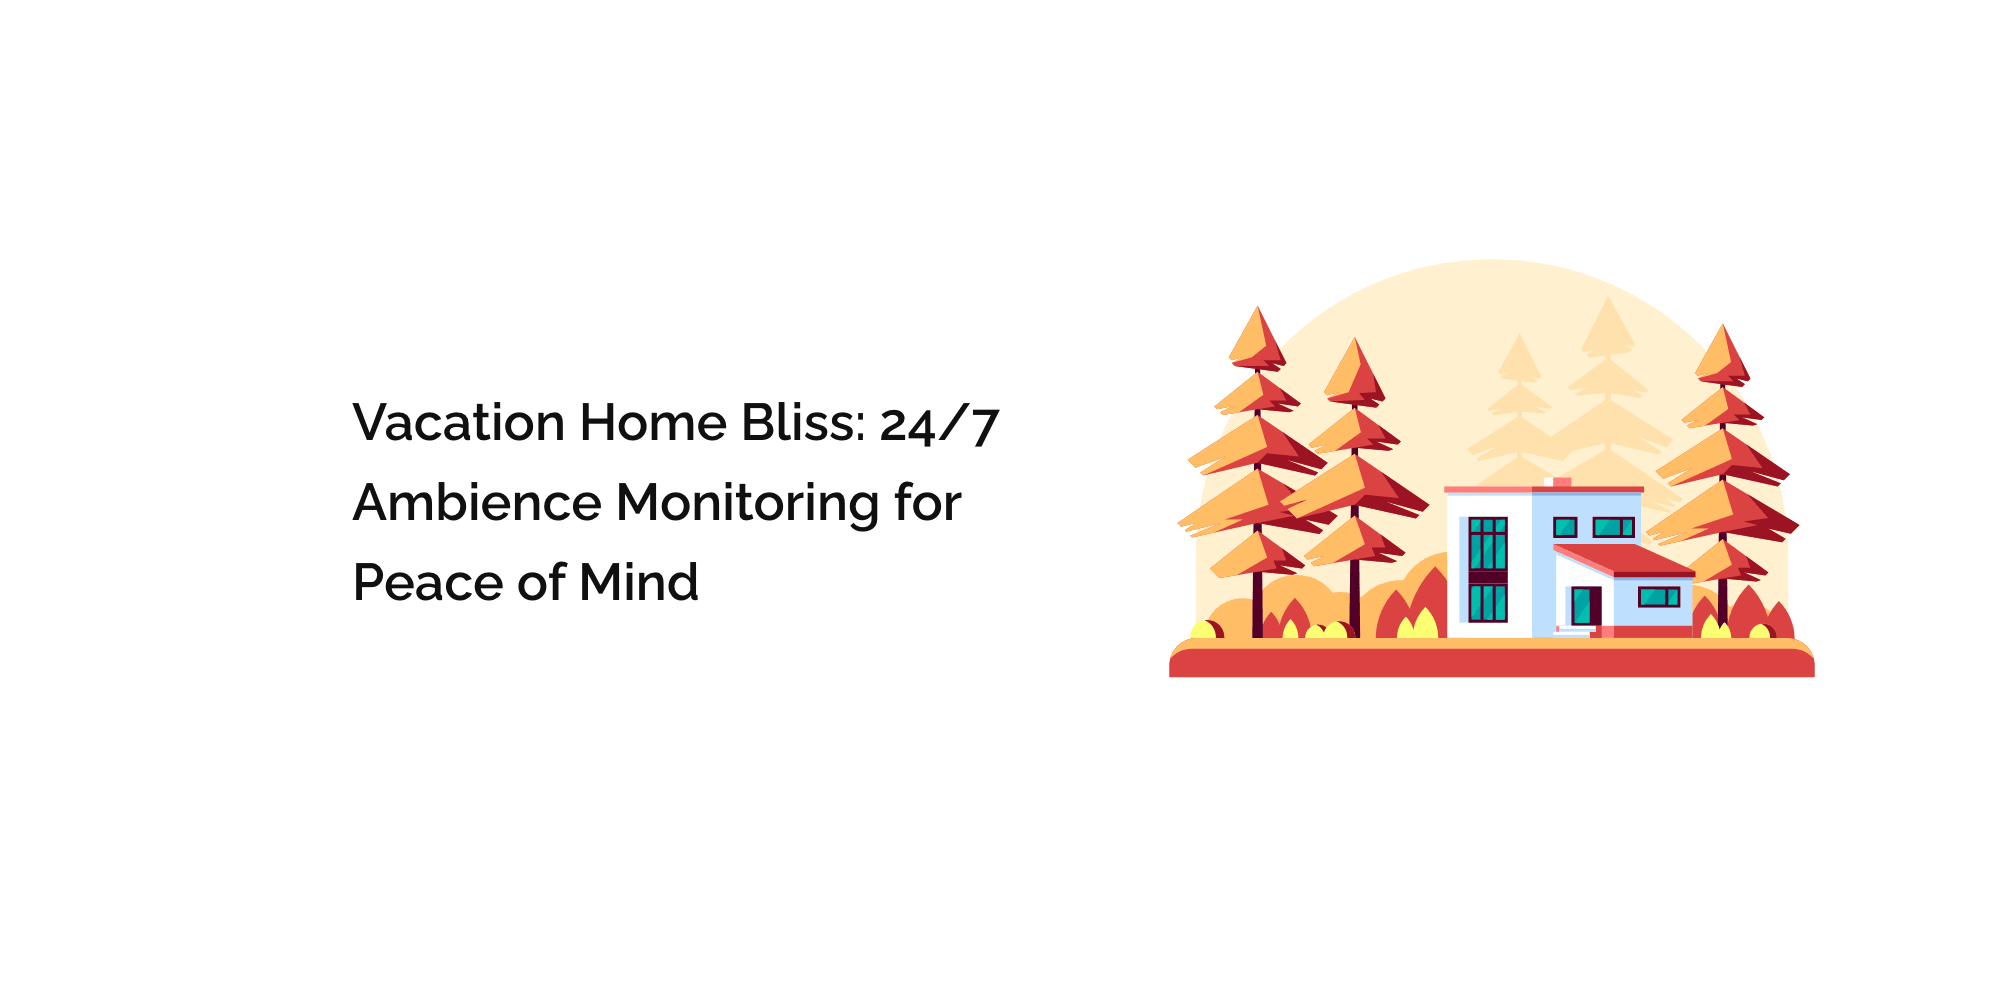 Vacation Home Bliss: 24/7 Ambience Monitoring for Peace of Mind